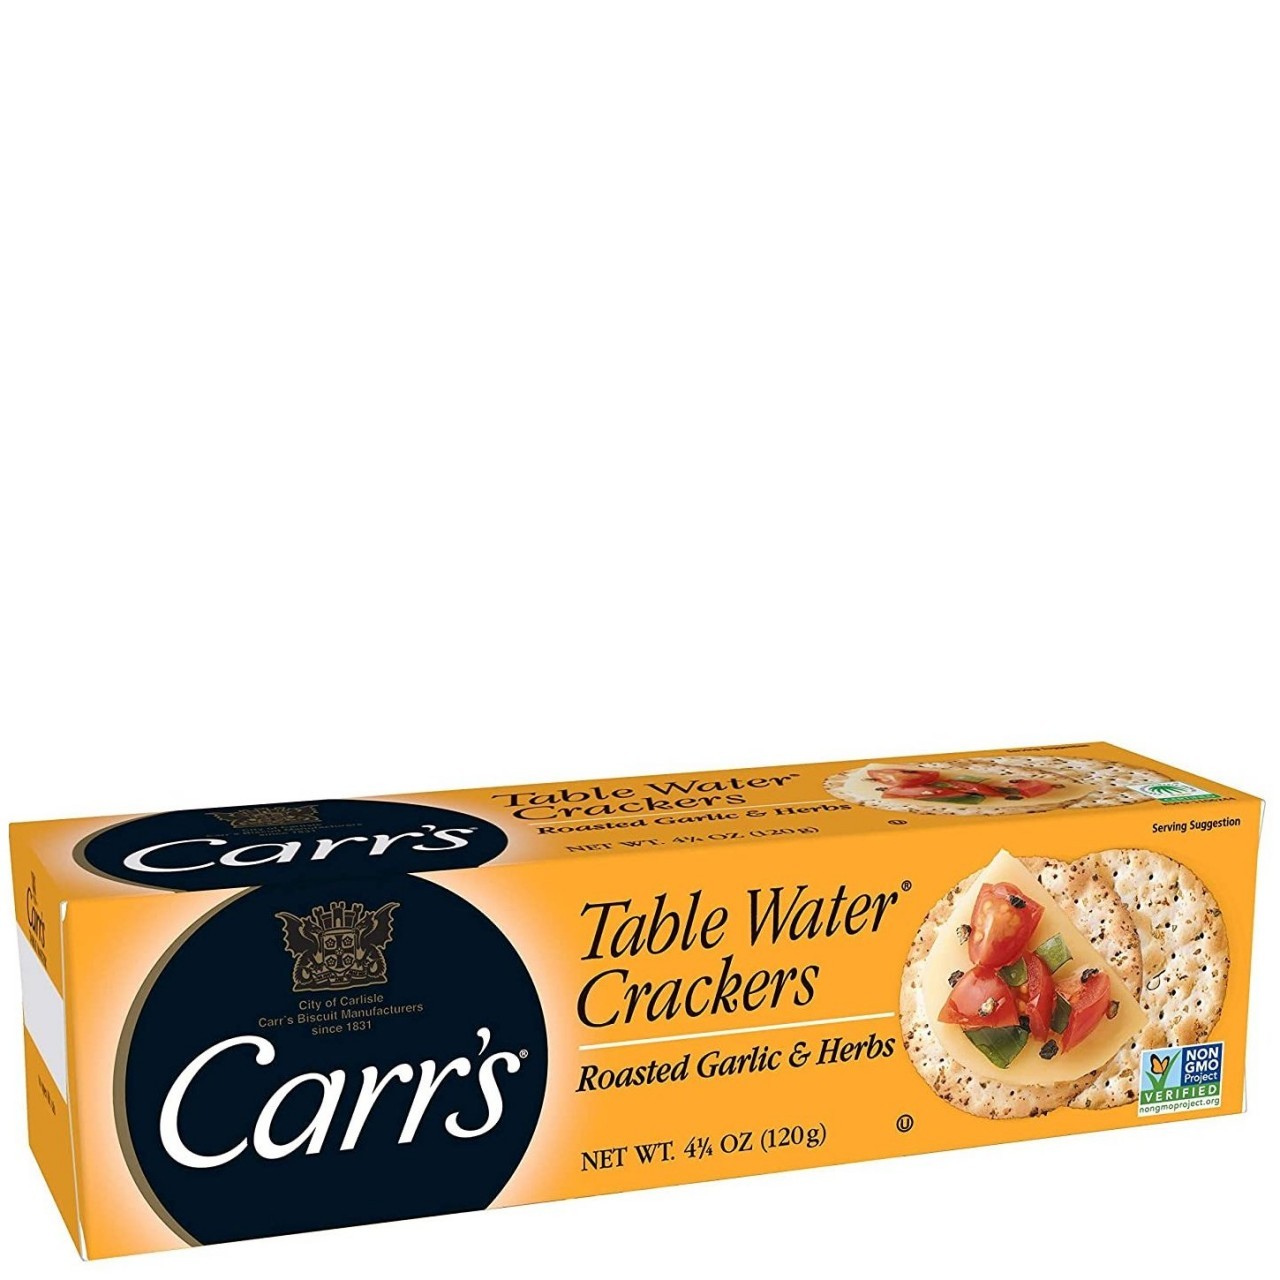 CARRS TABLE WATER CRACKERS GARLIC 120g